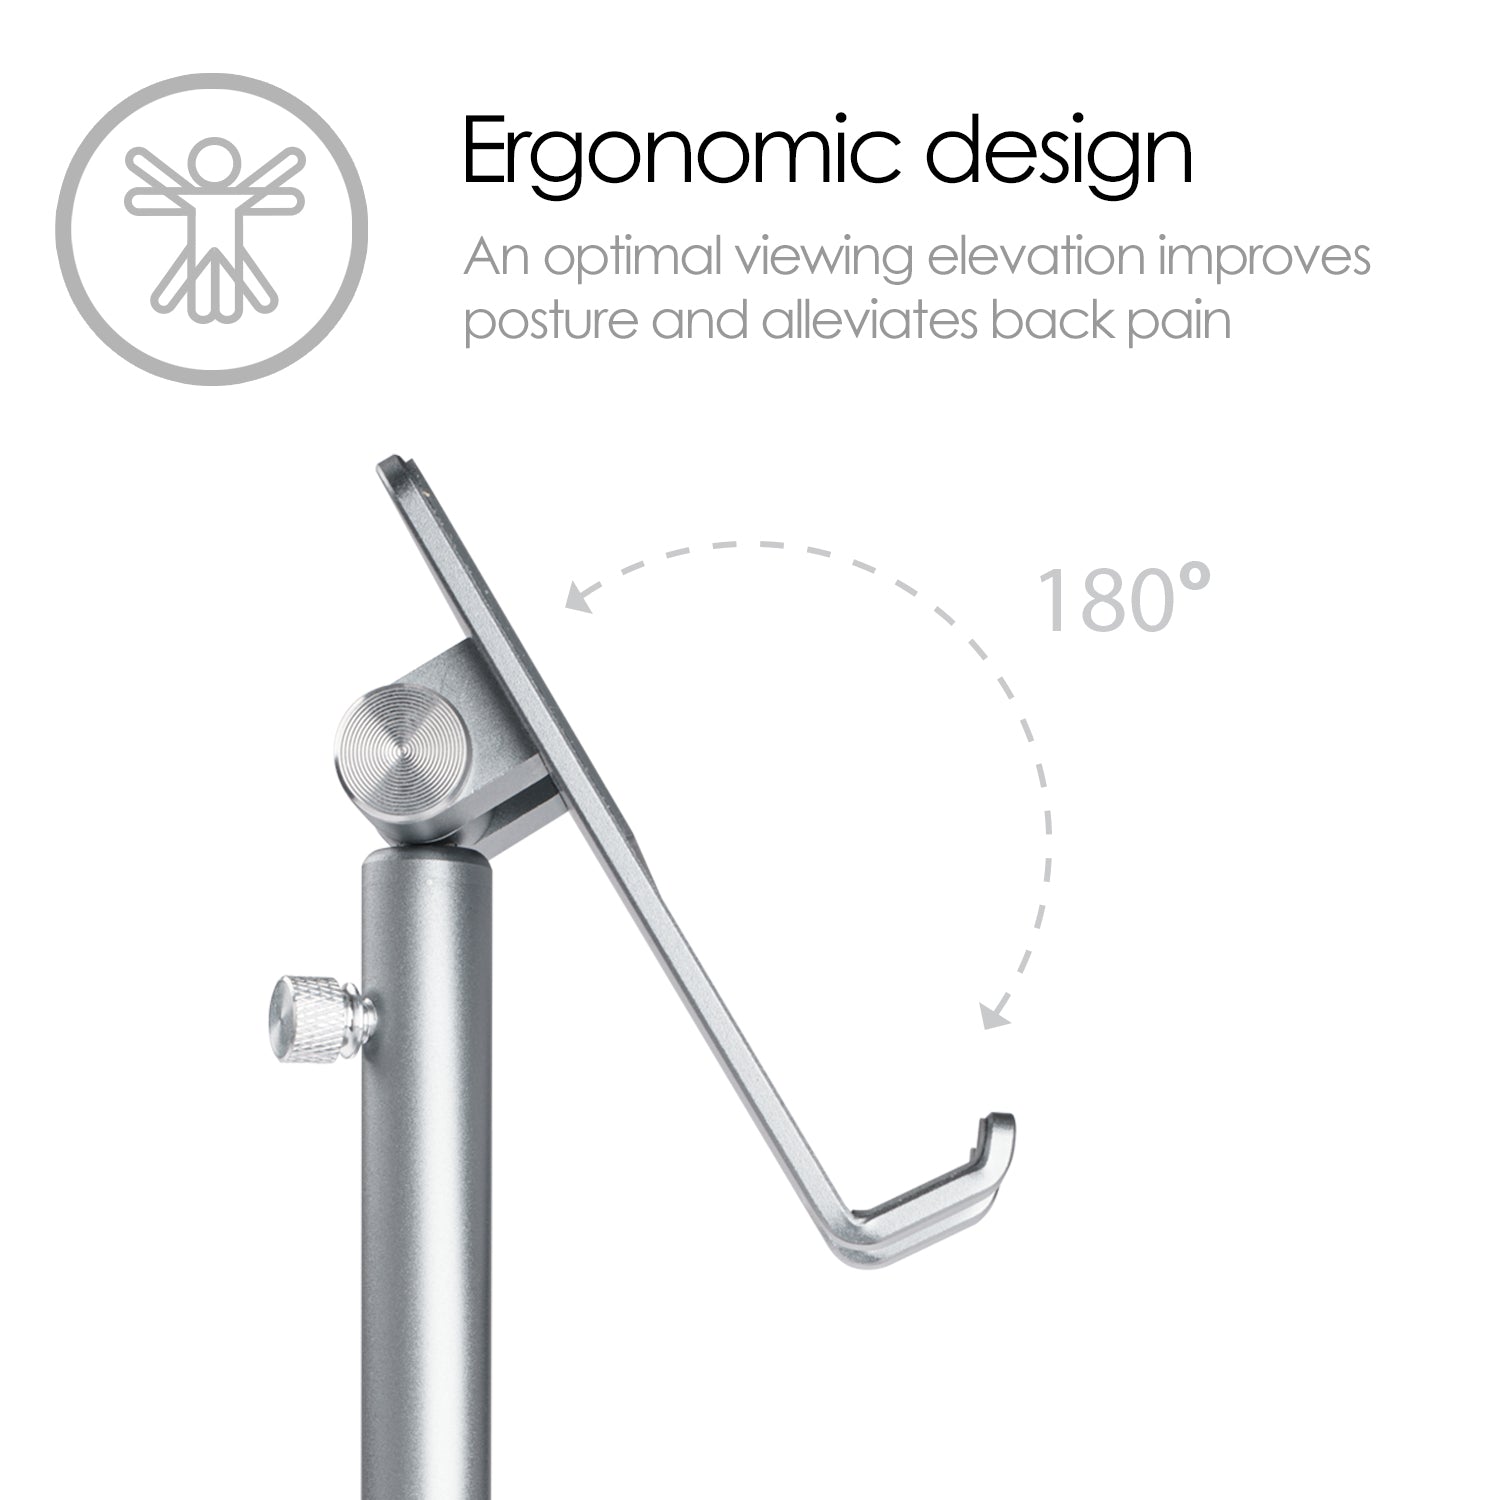 an aluminium metal smartphone and tablet stand  shown from the side to show the 180 degree adjustment on the vertical plane that the stand provides.  Text reads "ergonomic design - an optimal viewing elevation improves posture and alleviates back pain" 